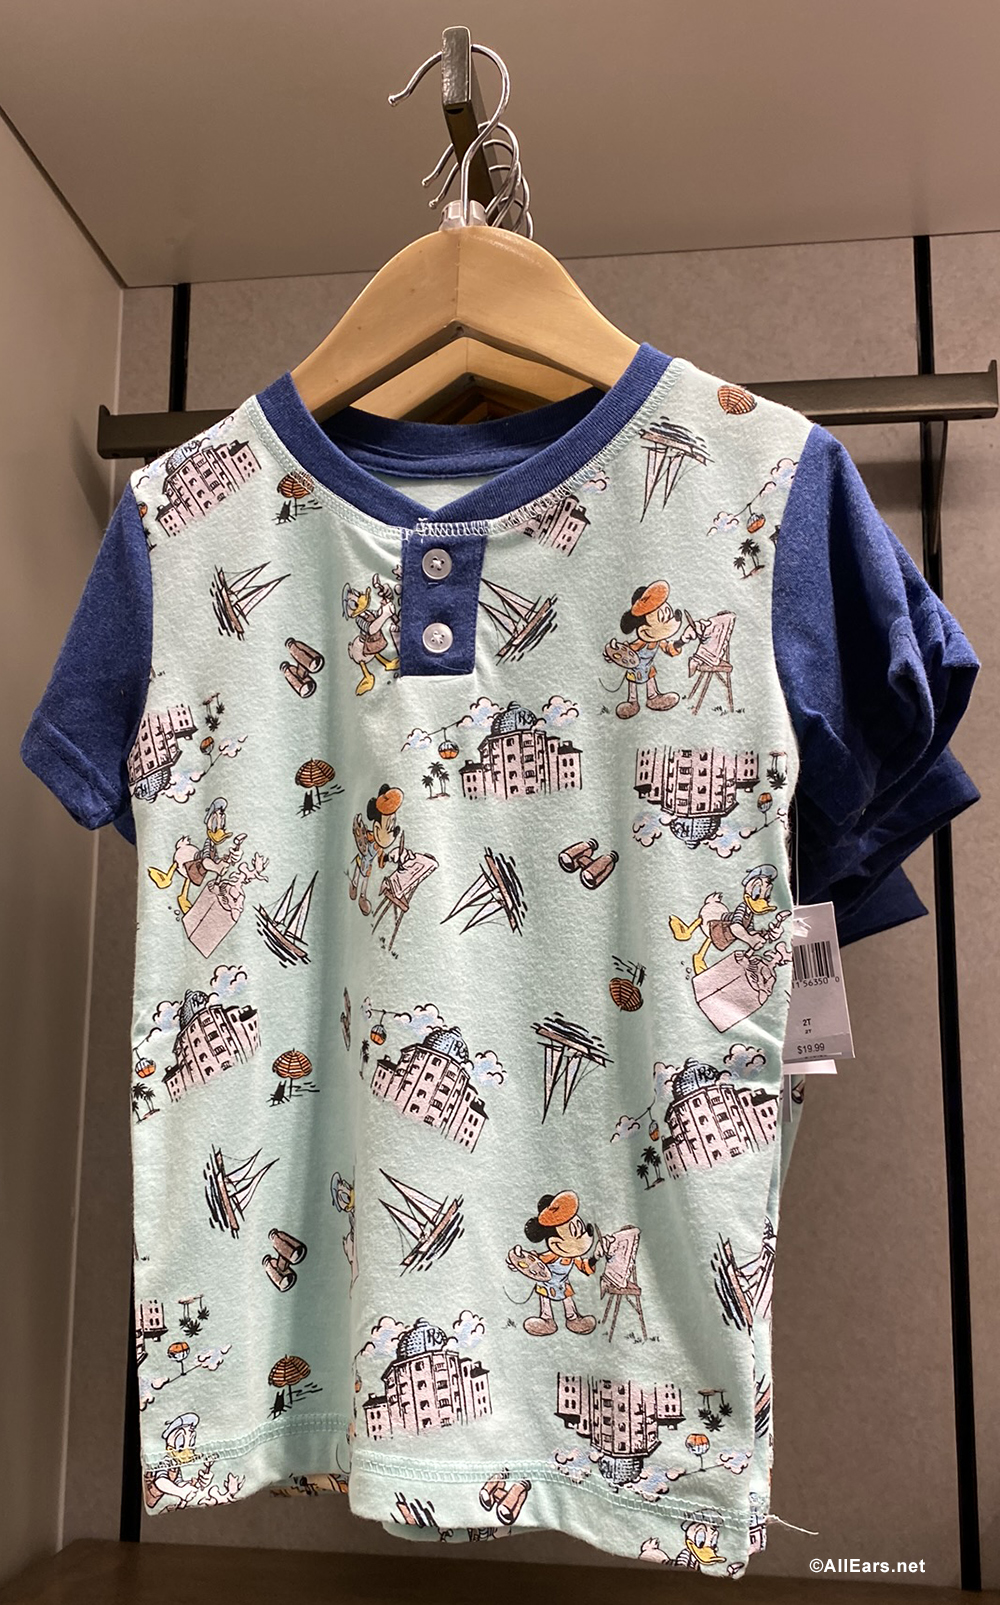 Check Out All The New Merch at Disney's Riviera Resort! - AllEars.Net